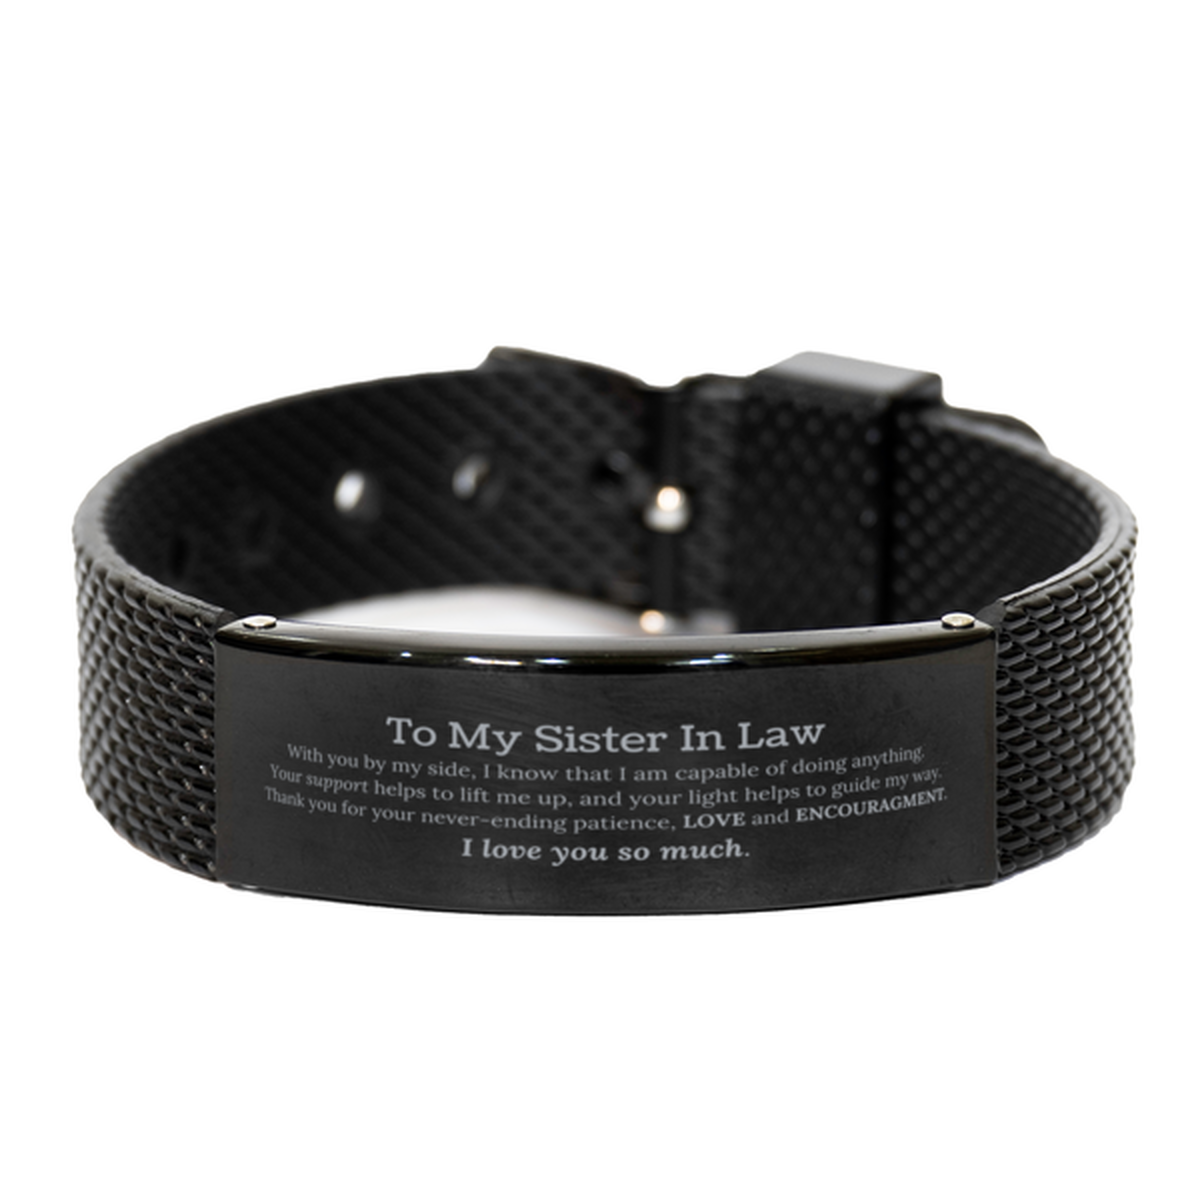 Appreciation Sister In Law Black Shark Mesh Bracelet Gifts, To My Sister In Law Birthday Christmas Wedding Keepsake Gifts for Sister In Law With you by my side, I know that I am capable of doing anything. I love you so much